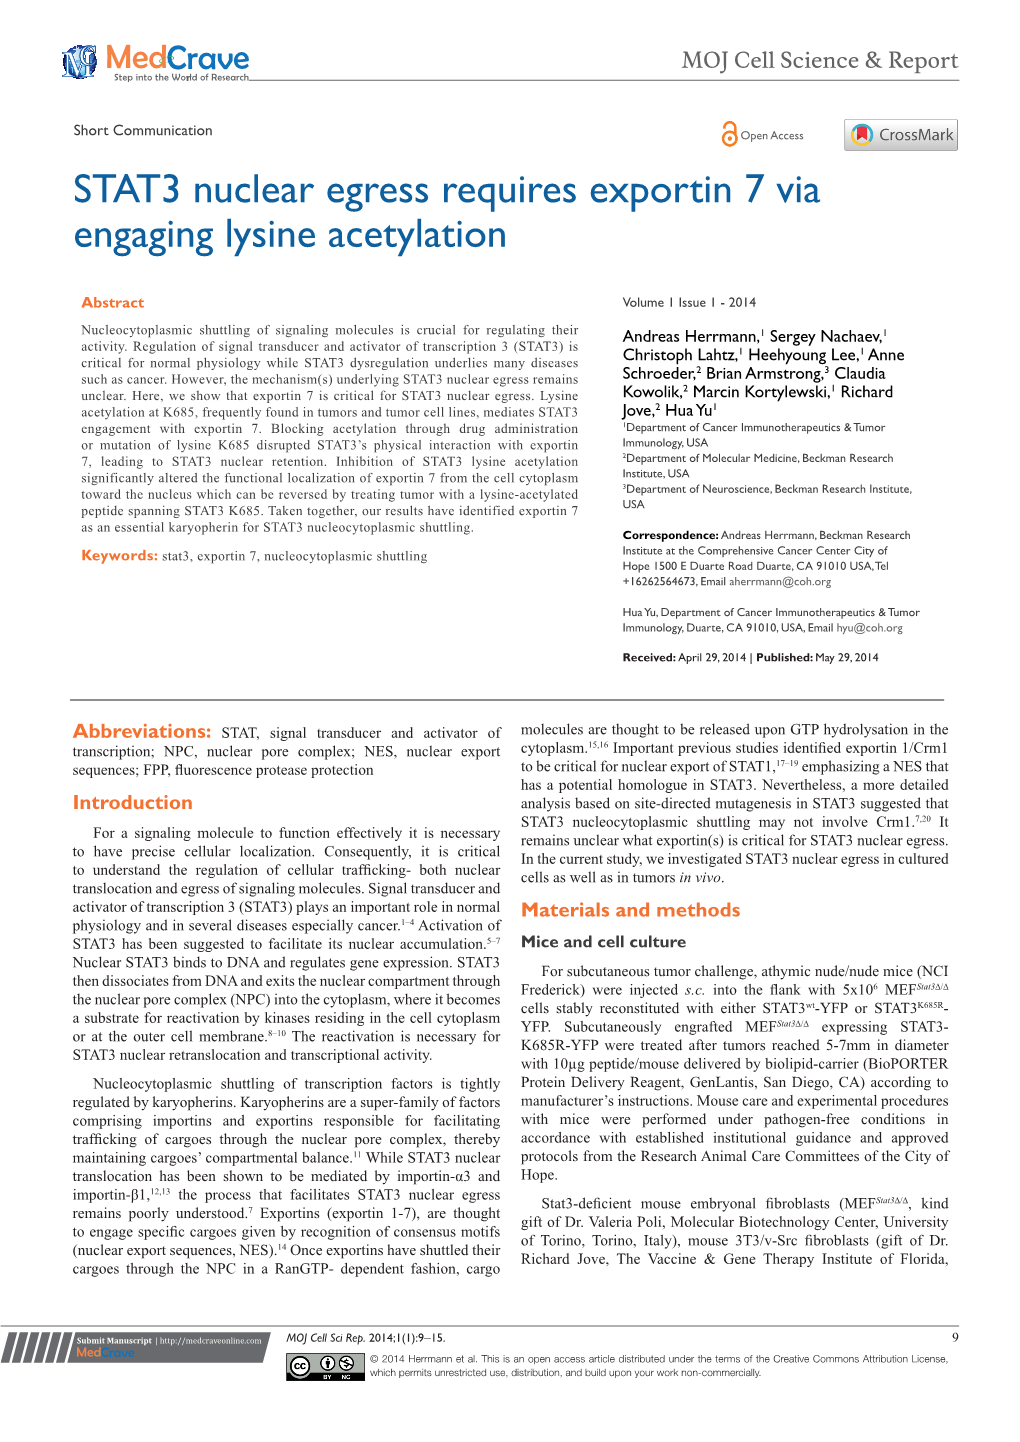 STAT3 Nuclear Egress Requires Exportin 7 Via Engaging Lysine Acetylation